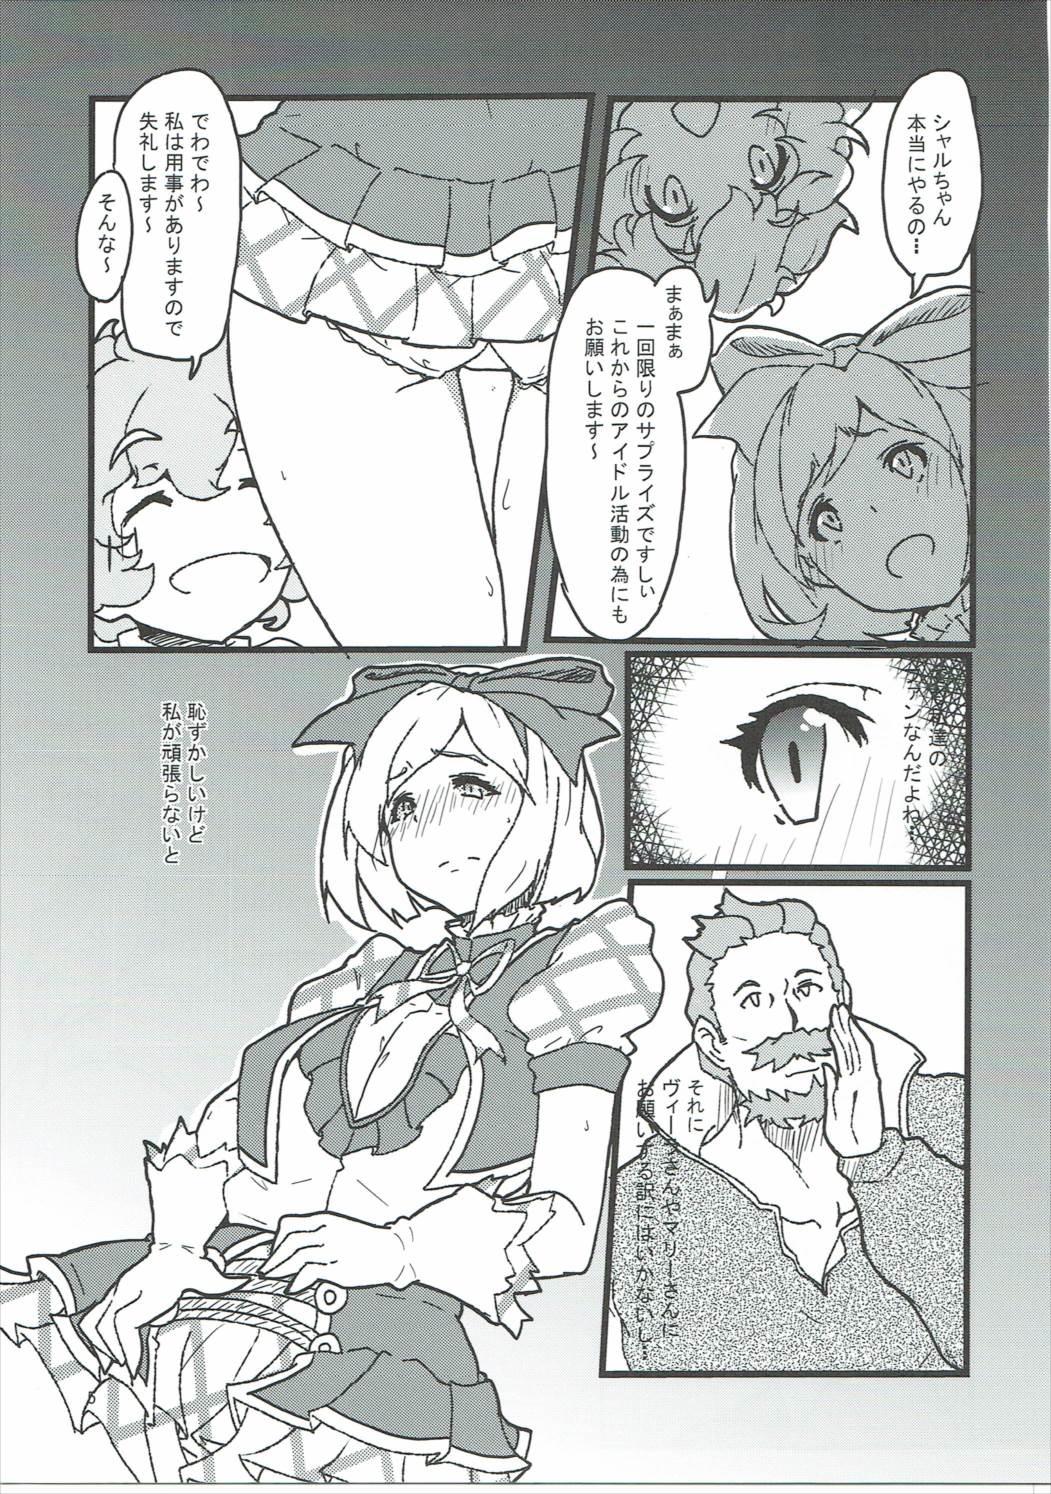 Licking Pussy Surprise Ticket - Granblue fantasy Footjob - Page 6